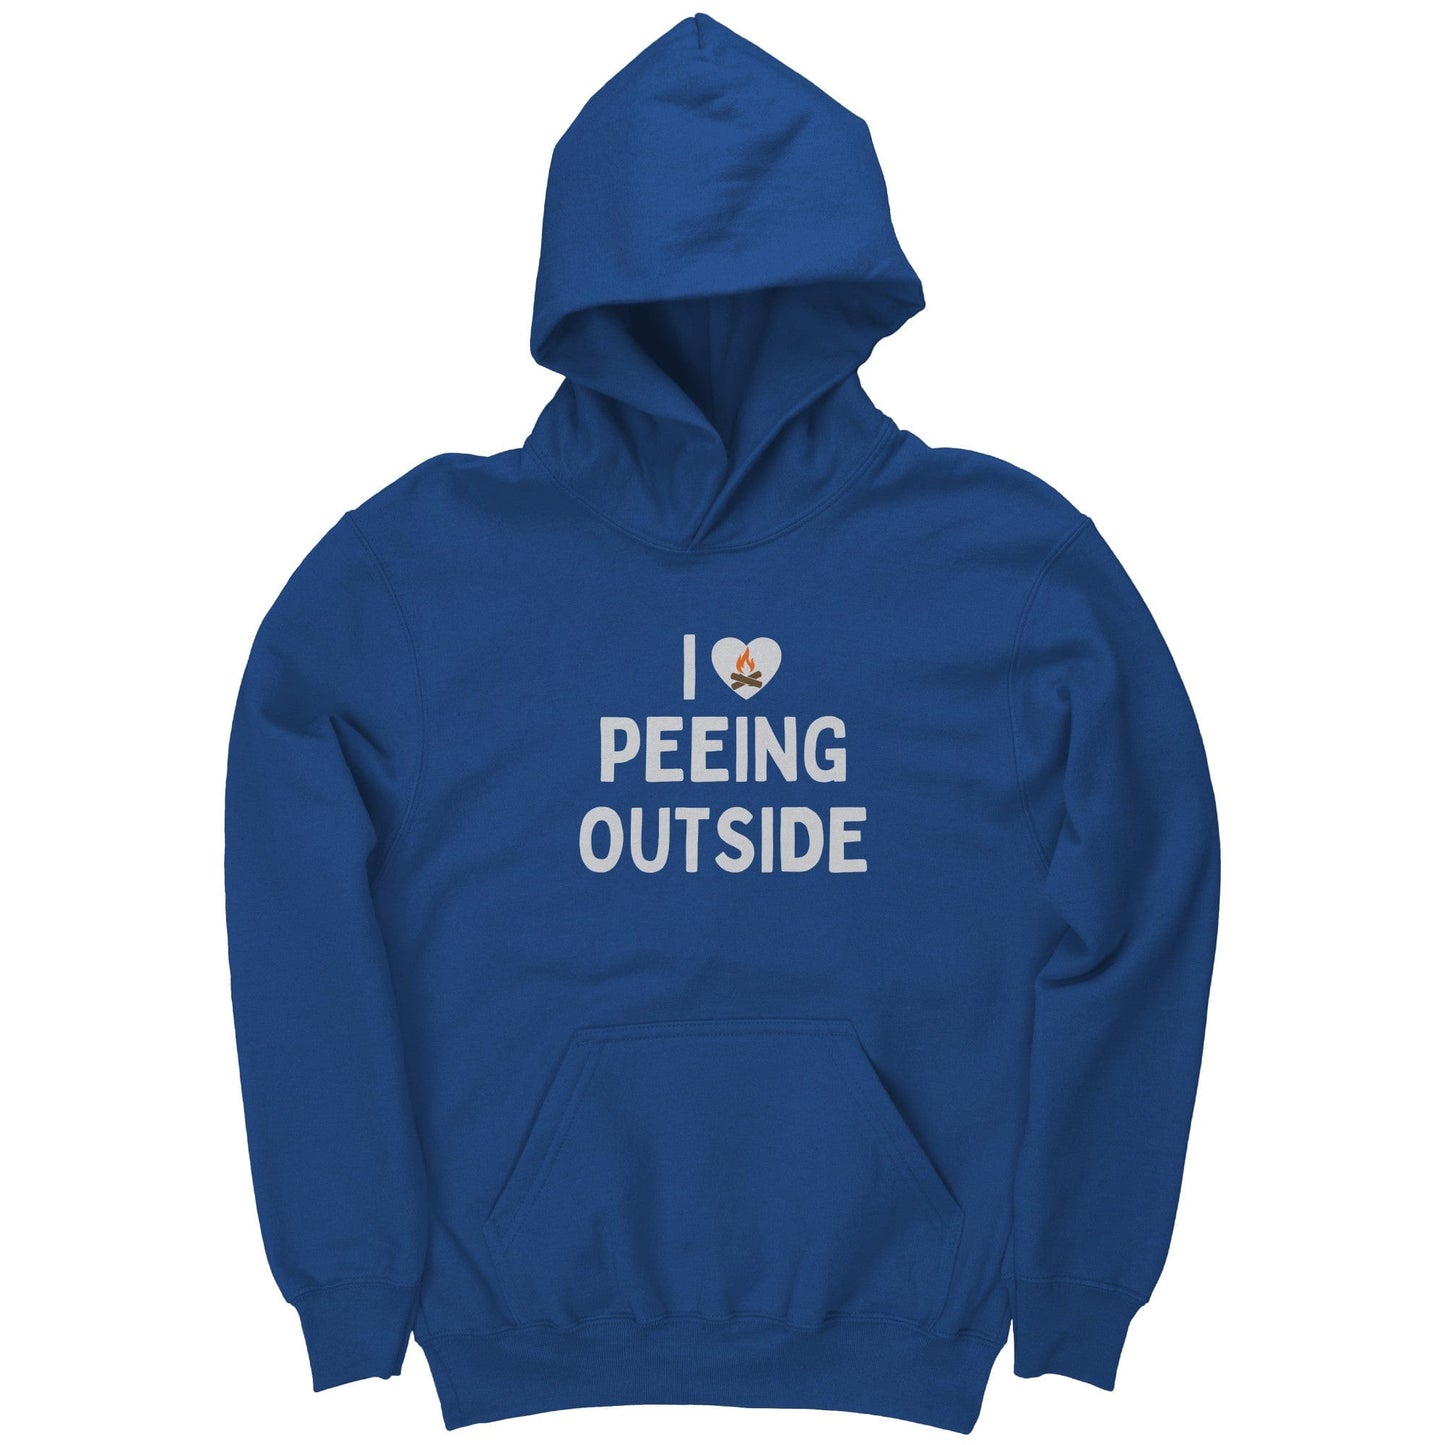 Funny "I Love Peeing Outside" Camping Kids Shirts and Hoodies